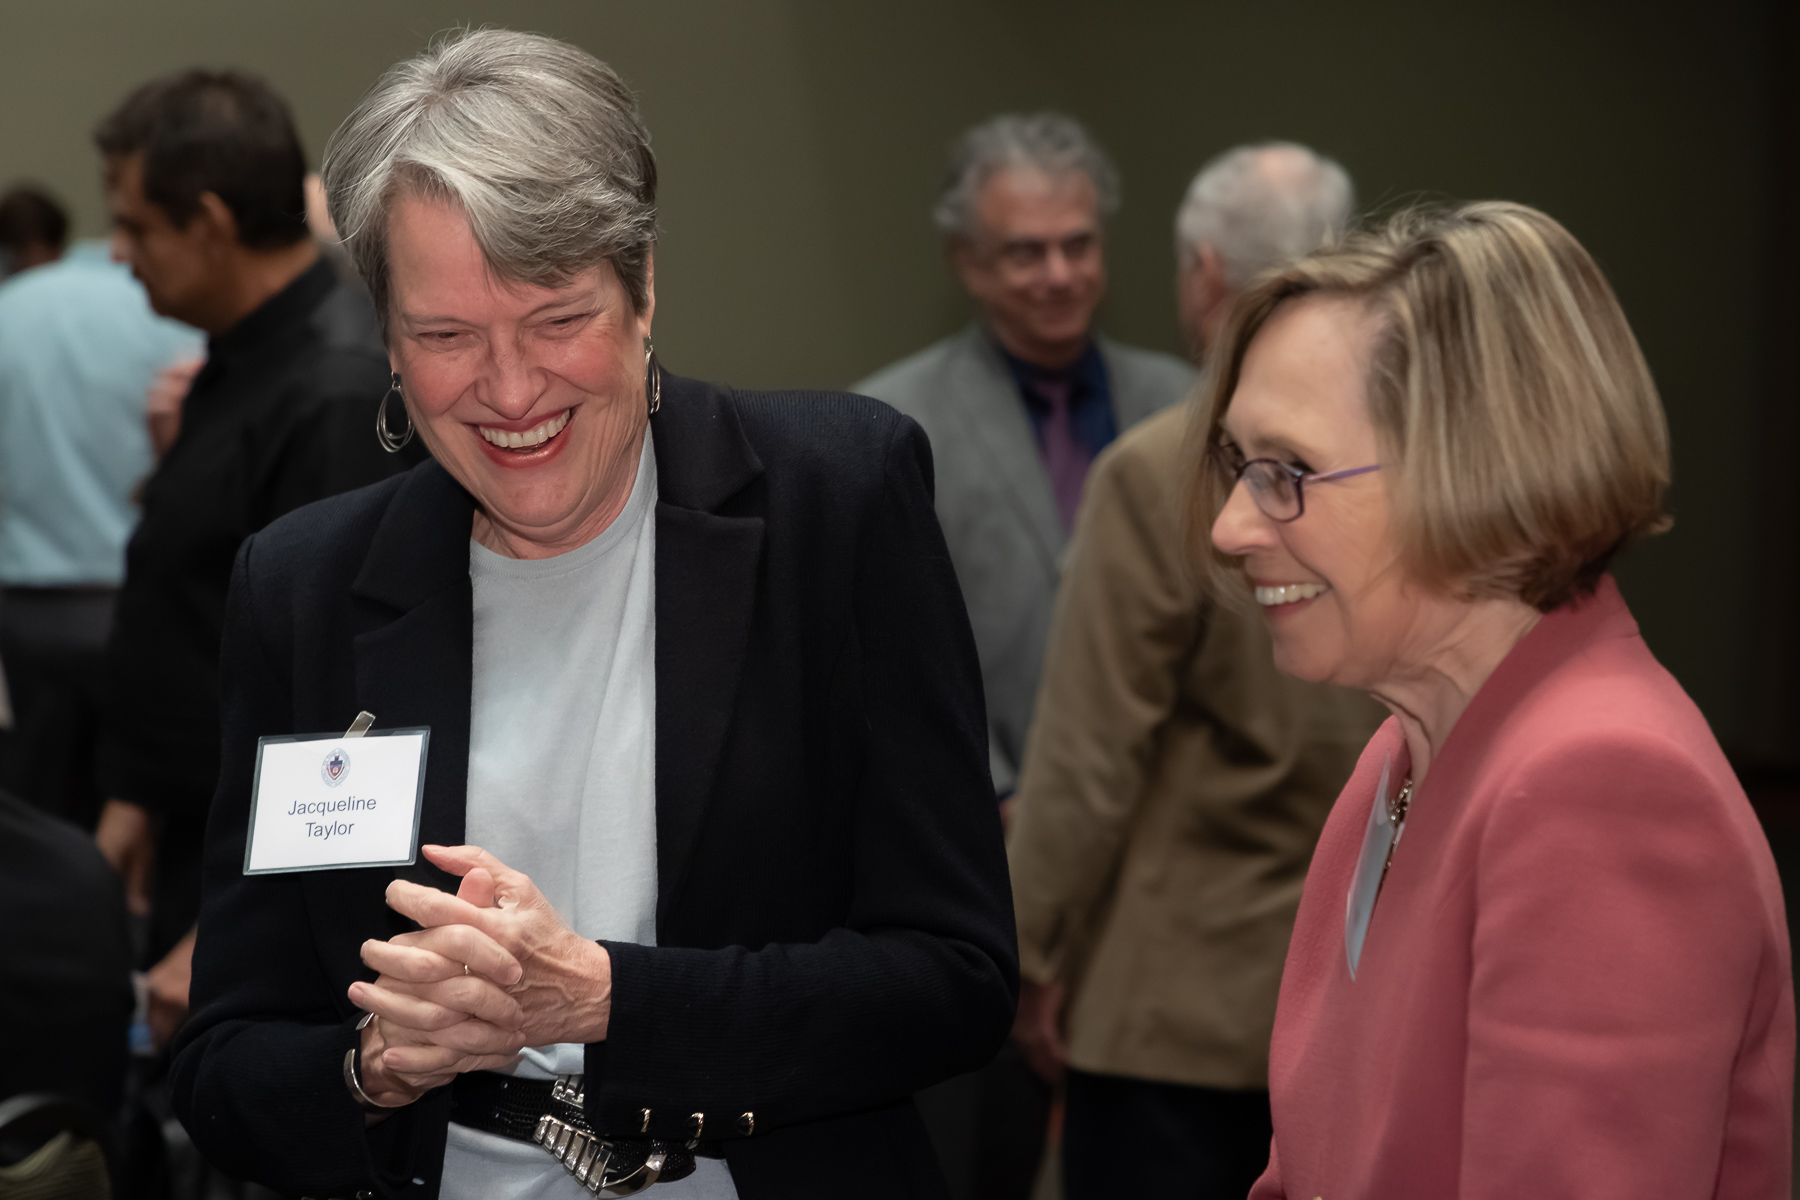 Jacqueline Taylor, former dean of the College of Communication, left, talks with fellow honorees as DePaul University faculty and staff members are honored for their 25 years of service during a luncheon, Tuesday, Nov. 13, 2018, at the Lincoln Park Student Center. The honorees were recognized by A. Gabriel Esteban, Ph.D., president of DePaul, and will have their names added to plaques located on the Loop and Lincoln Park Campuses. (DePaul University/Jeff Carrion)